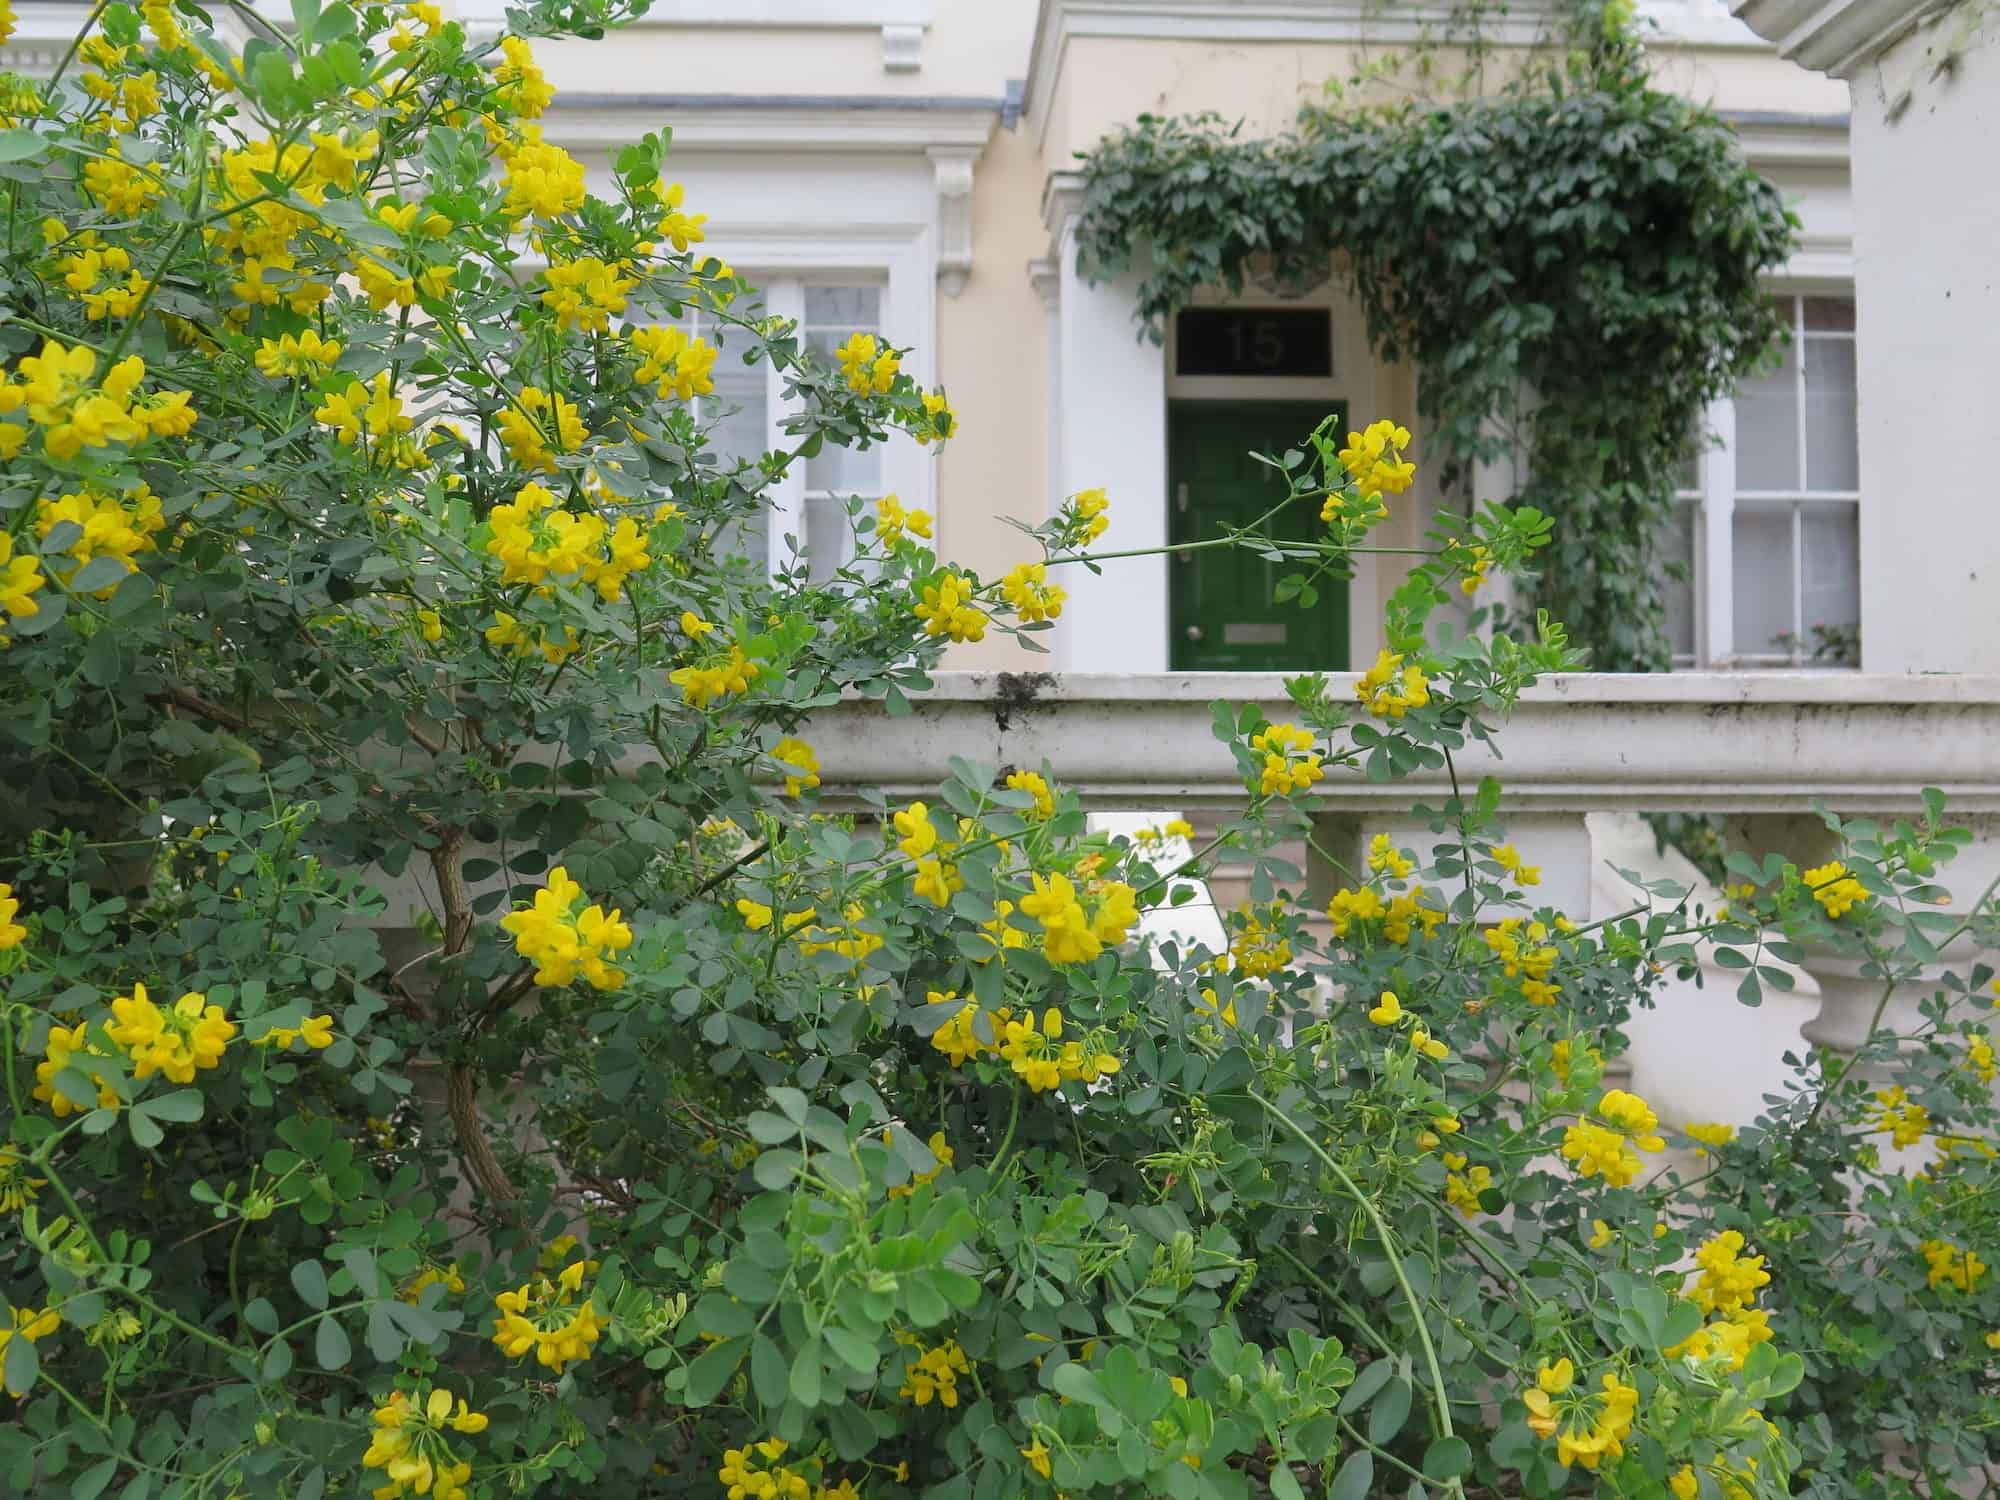 London is greener than Paris as there are more parks but also more trees and plant life in gardens and on side walks like this beautiful wild trees of yellow flowers in someone's front garden.